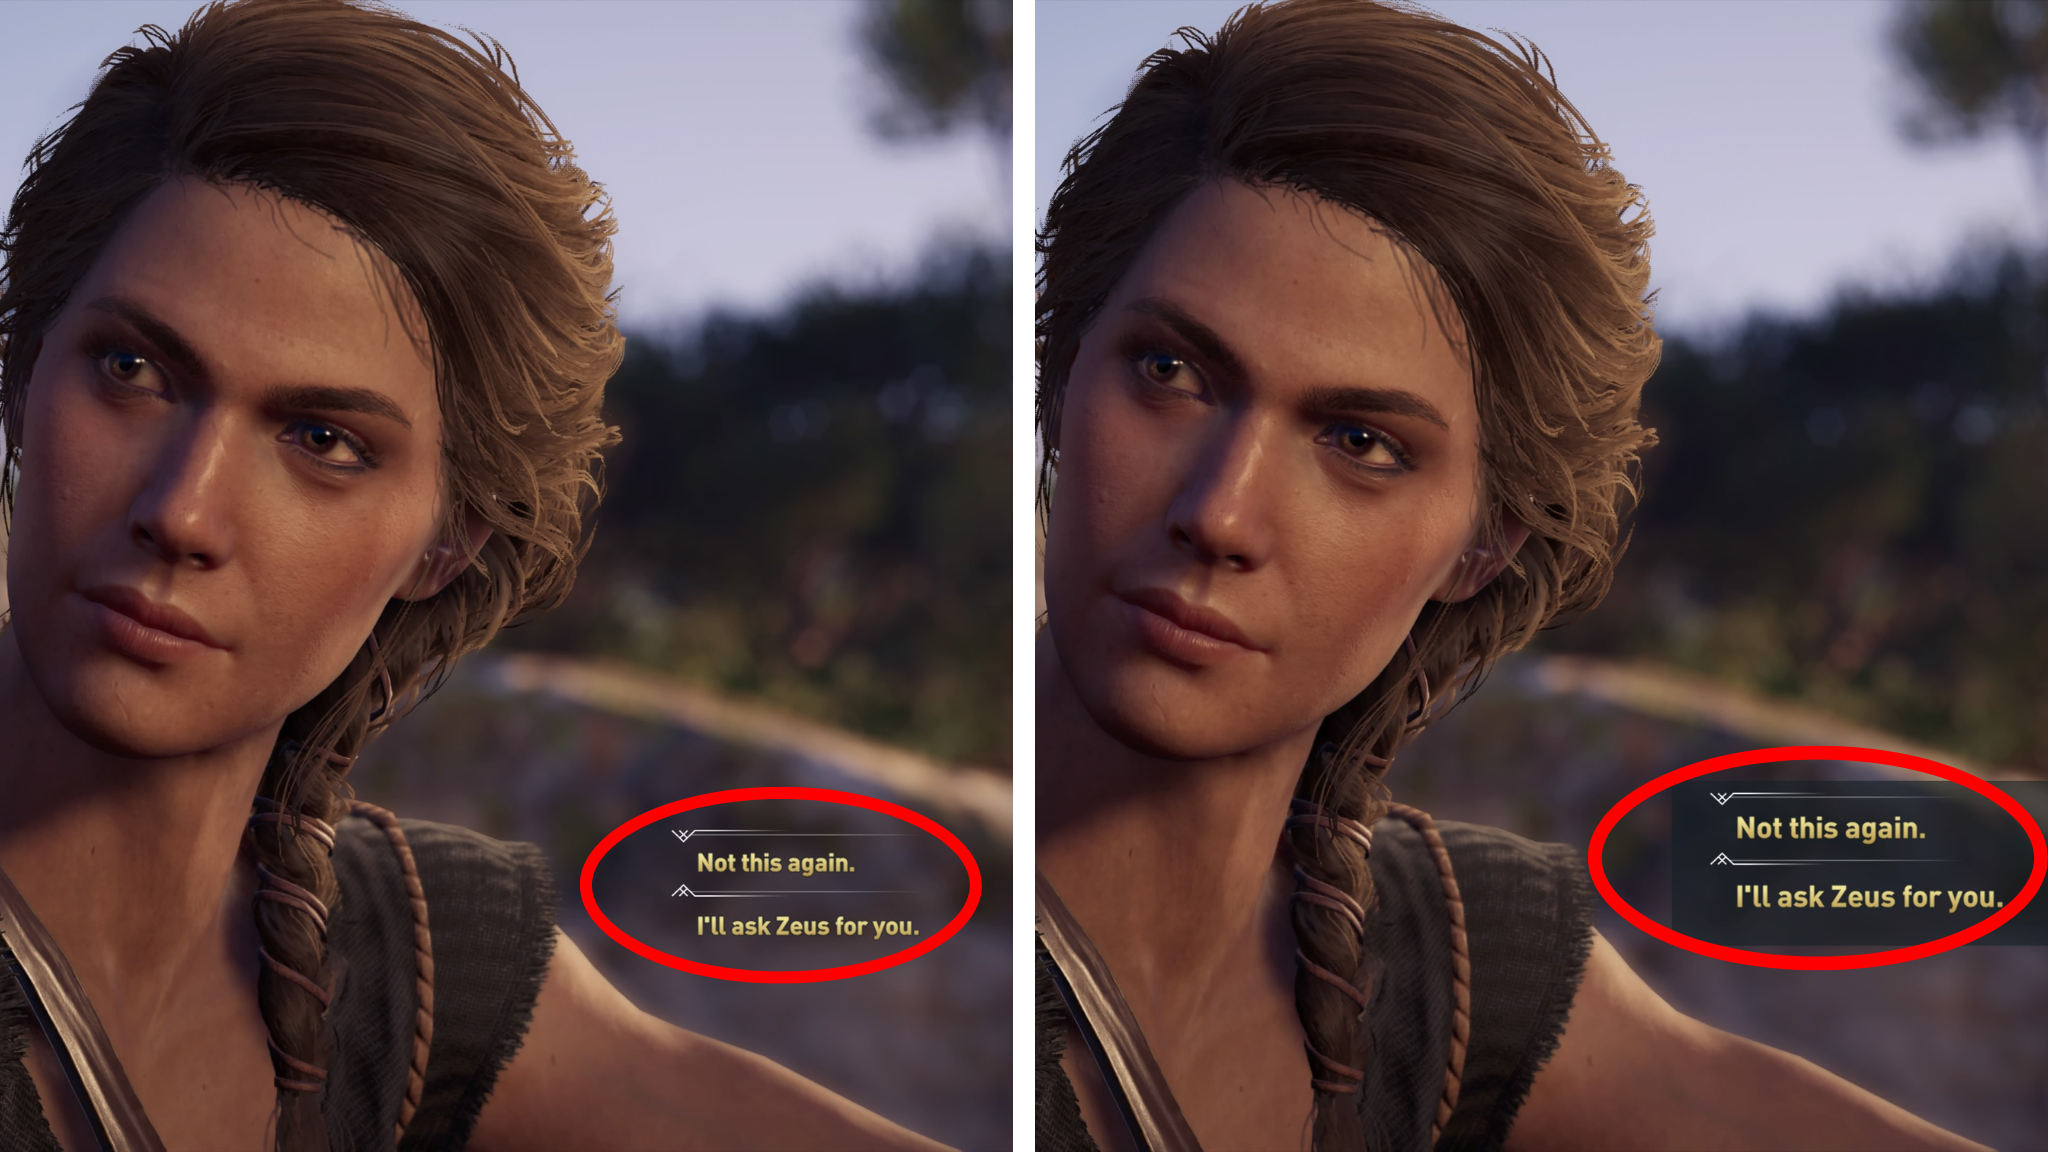 Comparison of text options in Assassin's Creed Odyssey.